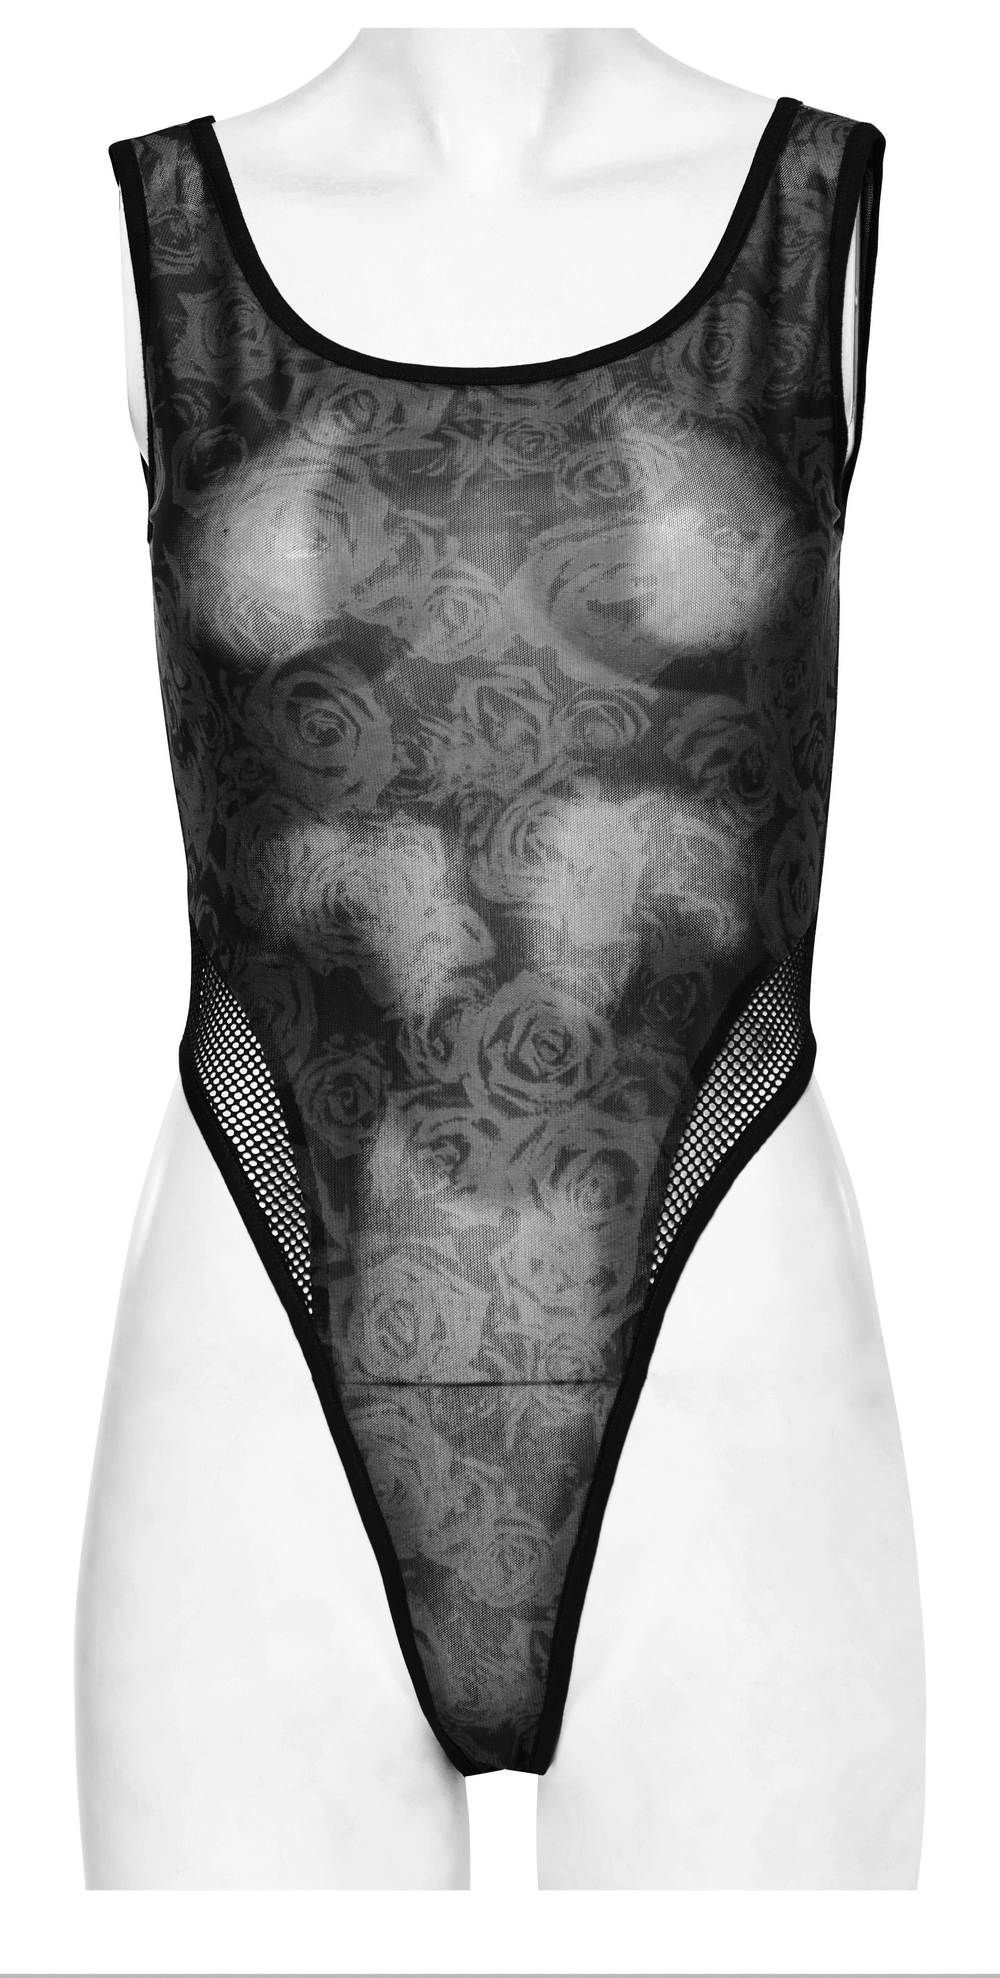 Edgy Women's Black Floral Bodysuit with Mesh Accents